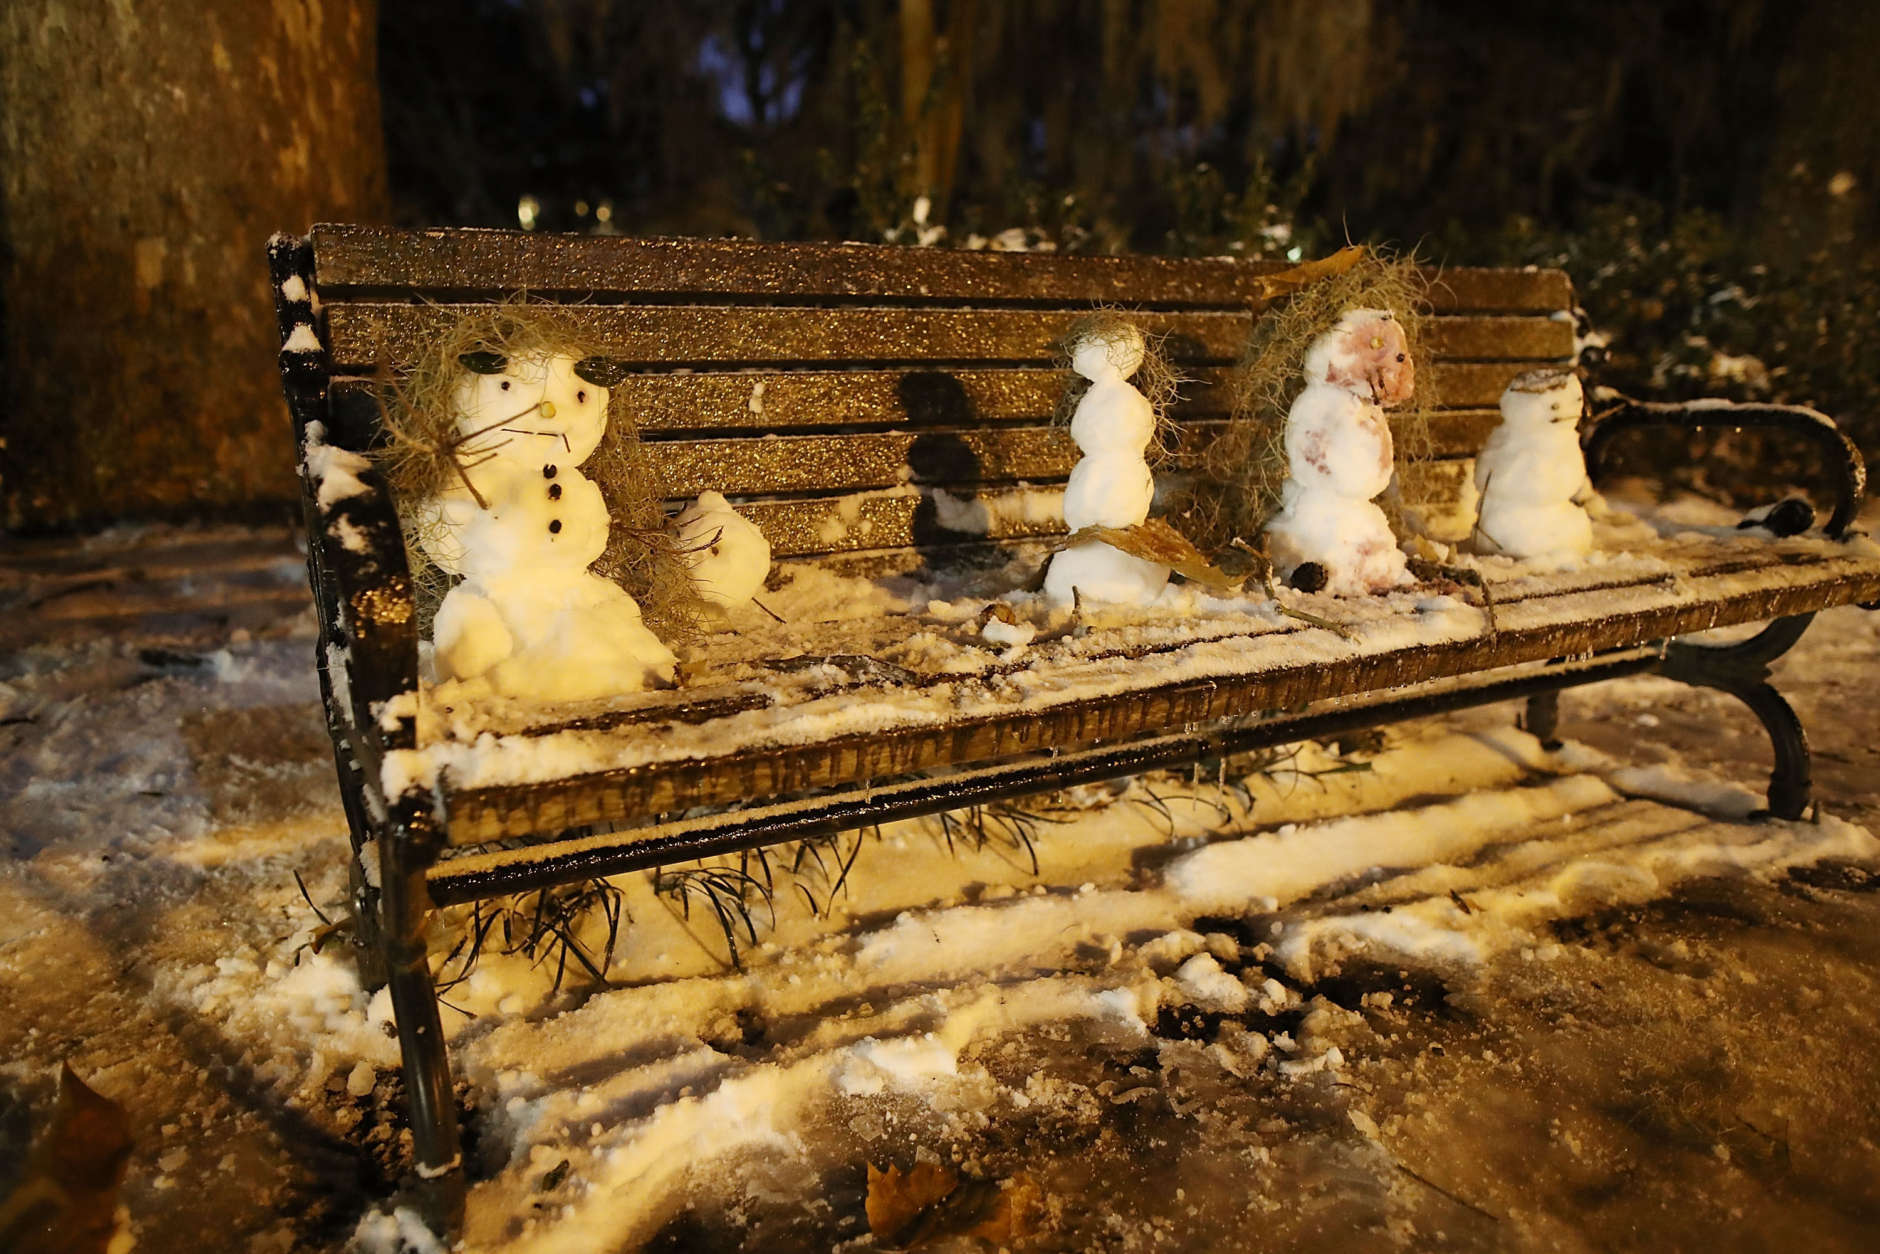 SAVANNAH, GA - JANUARY 04: Little snowmen are seen on a bench in Forsyth Park as snow and cold weather blanket the area on January 4, 2018 in Savannah, Georgia. The extreme winter storm pummeled the Southeastern United States and is moving towards the east coast with frigid temperatures and heavy wind and snow.  (Photo by Joe Raedle/Getty Images)